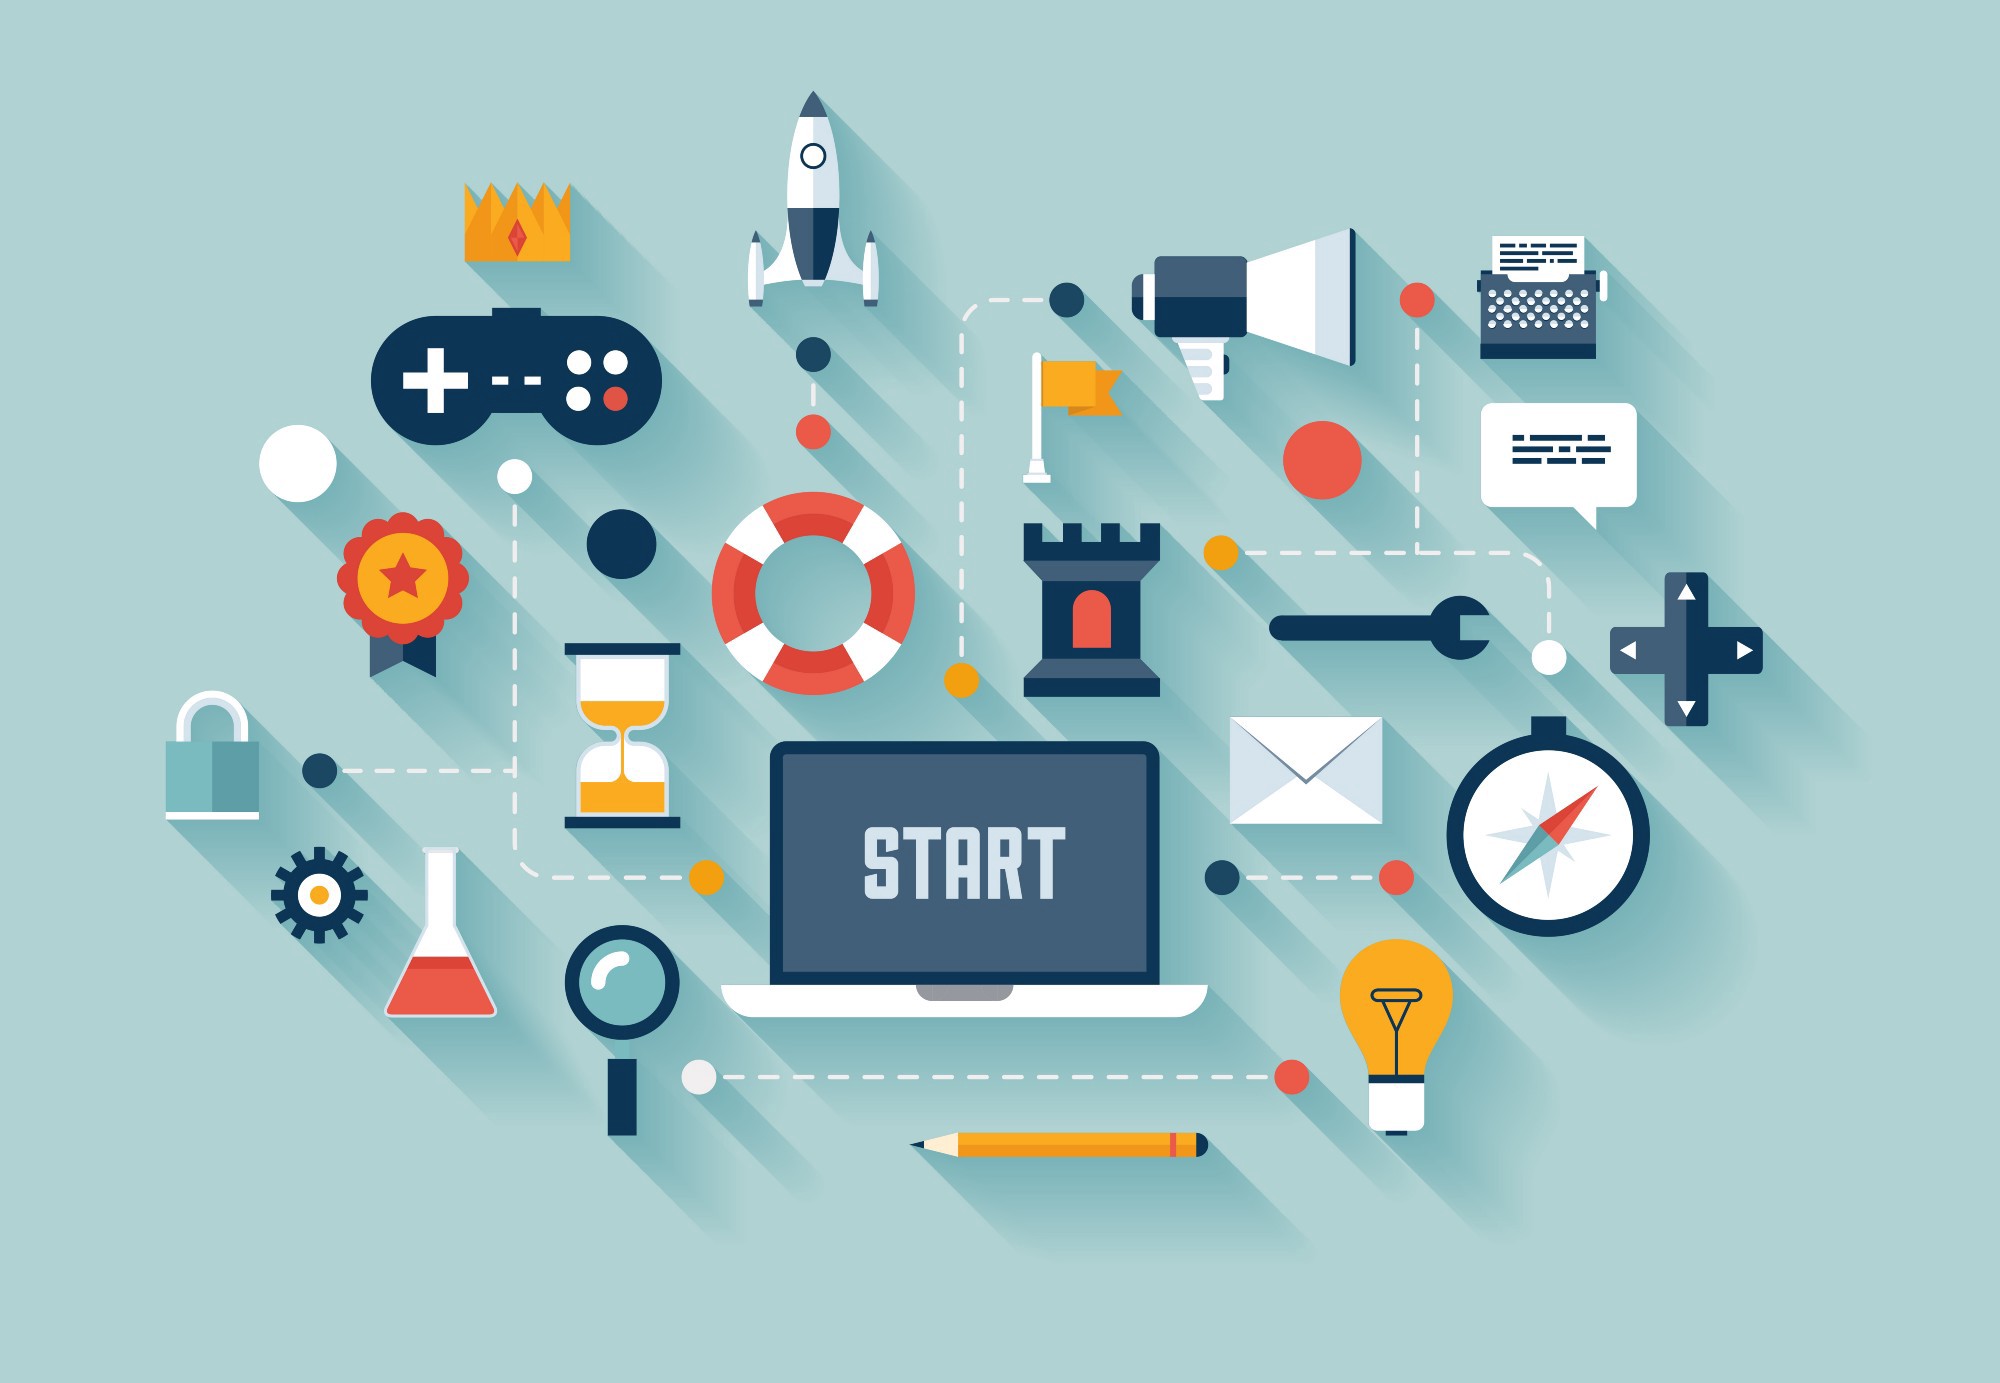 First things first – What is gamification?